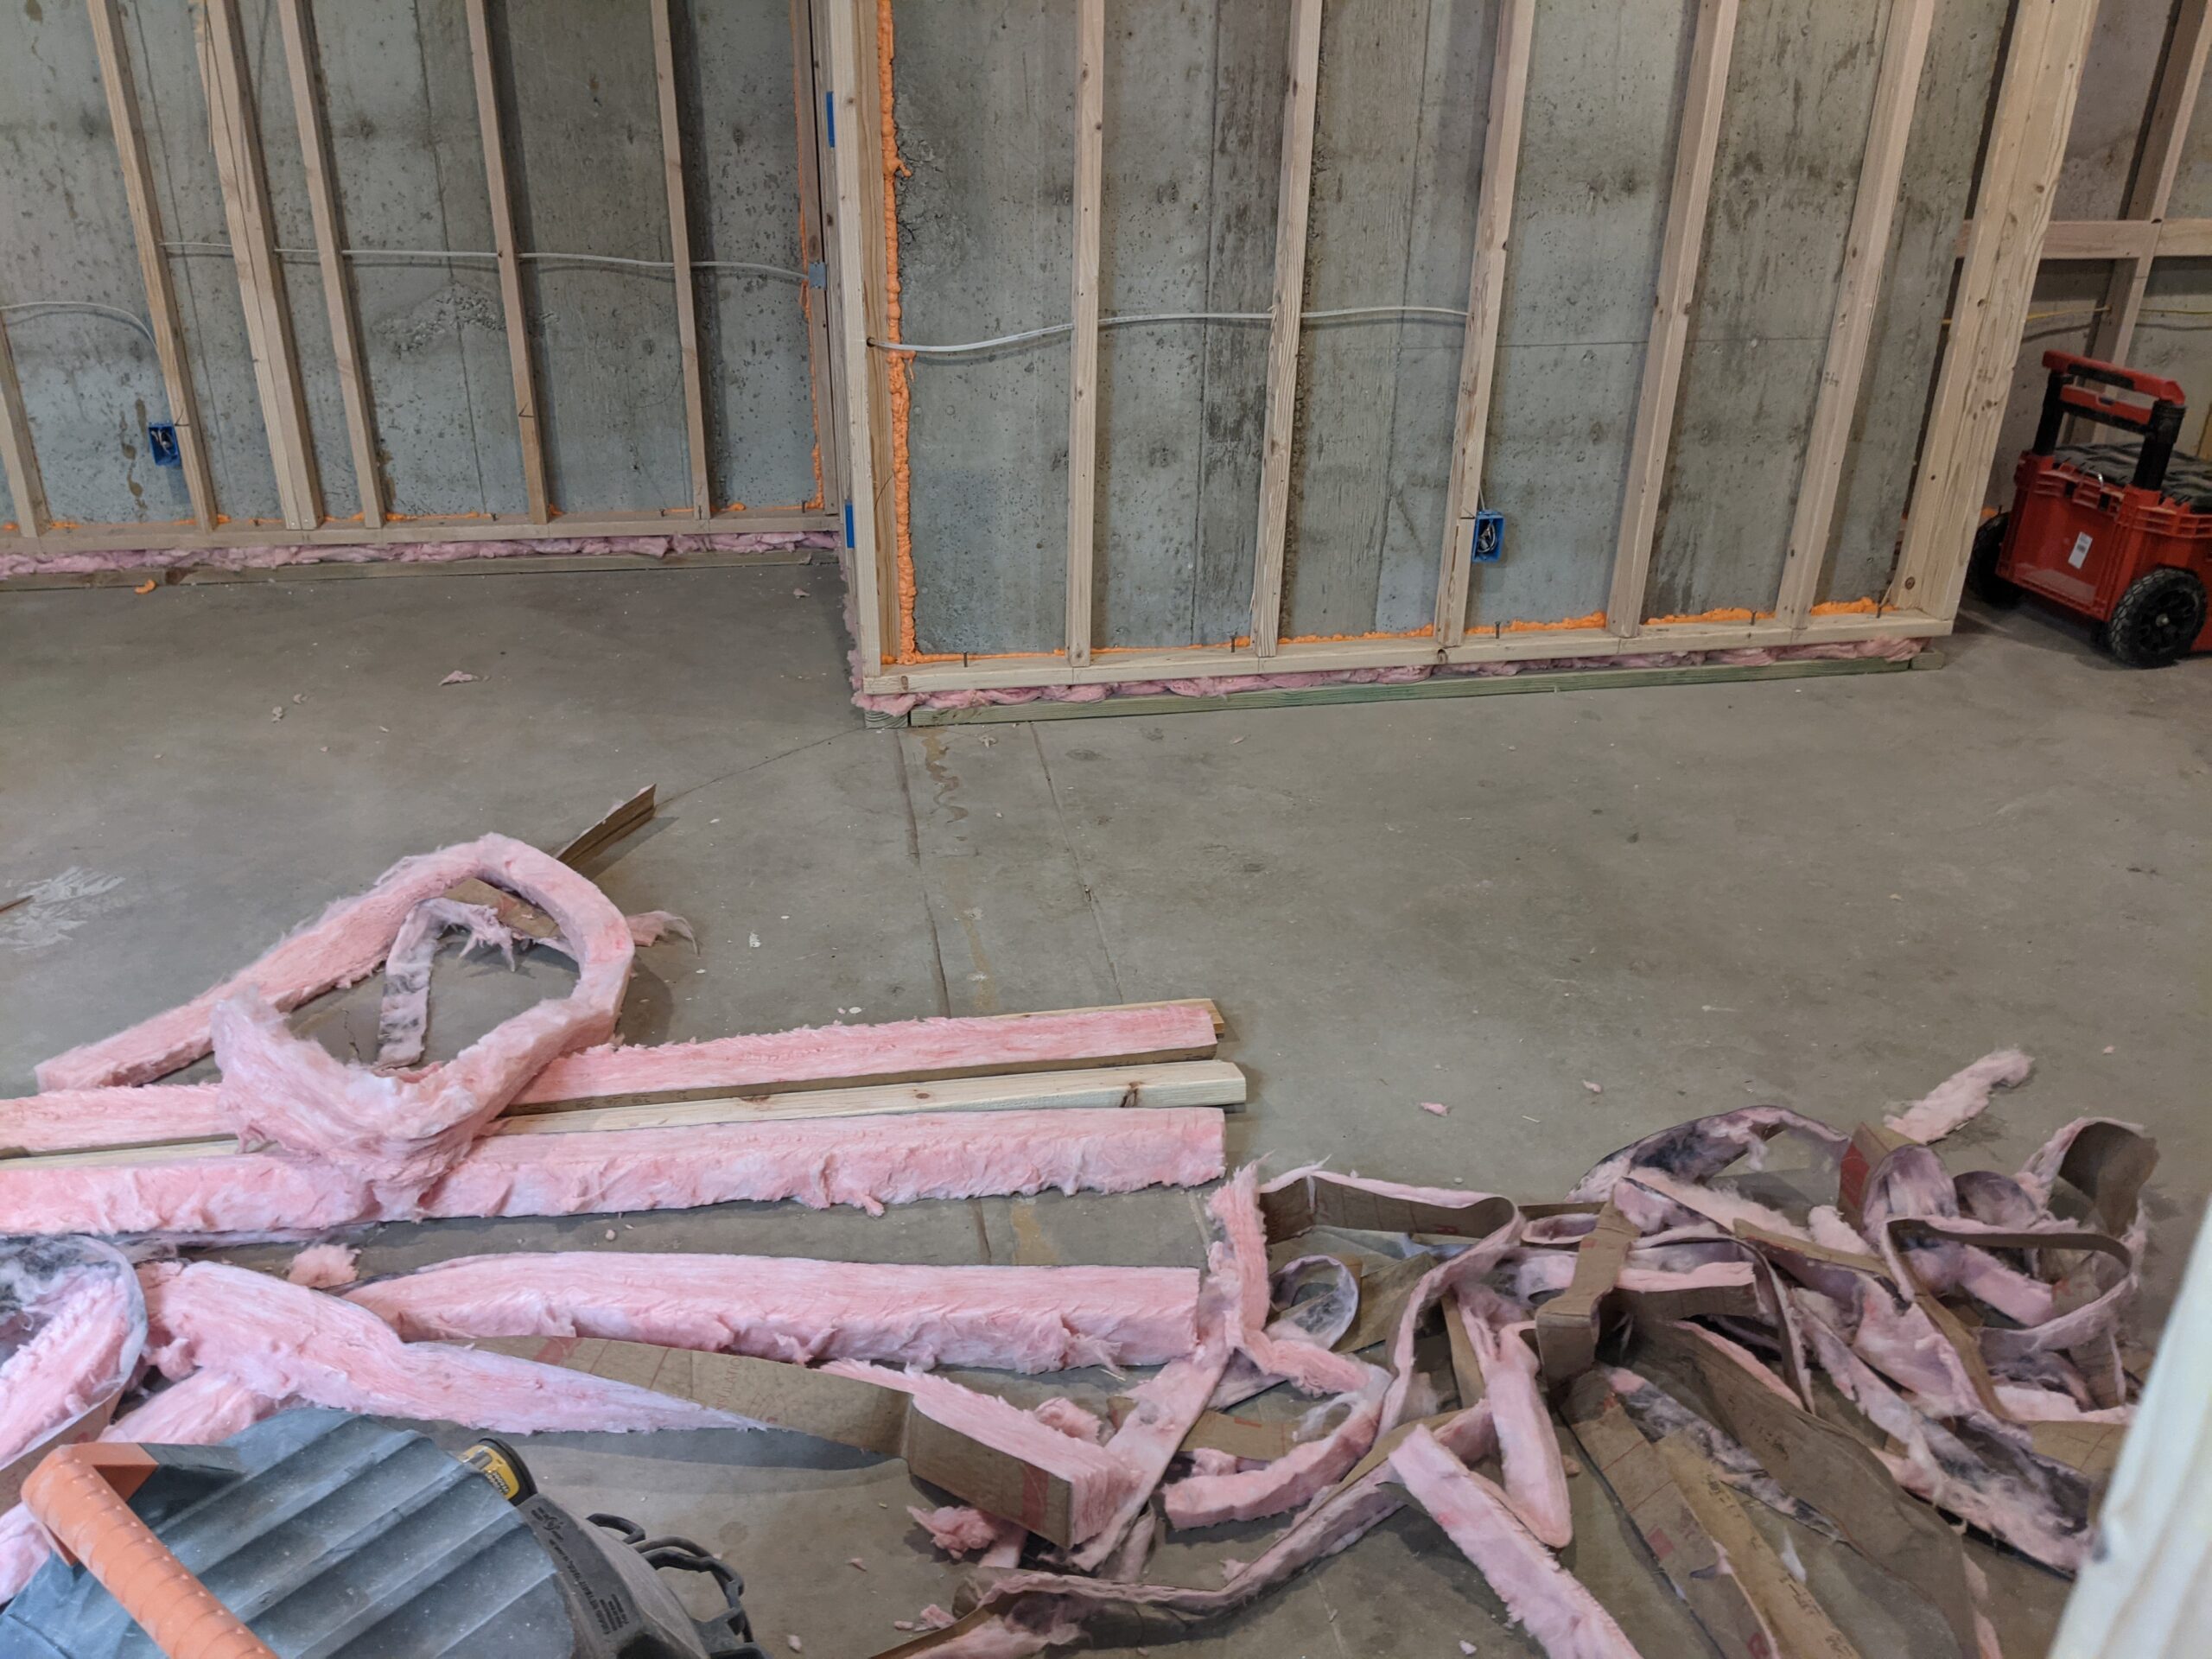 IN PROGRESS We stuffed strips of pink insulation in the gap between the wall & floor plate and sprayed orange fire-blocking insulation vertically every 10 feet.